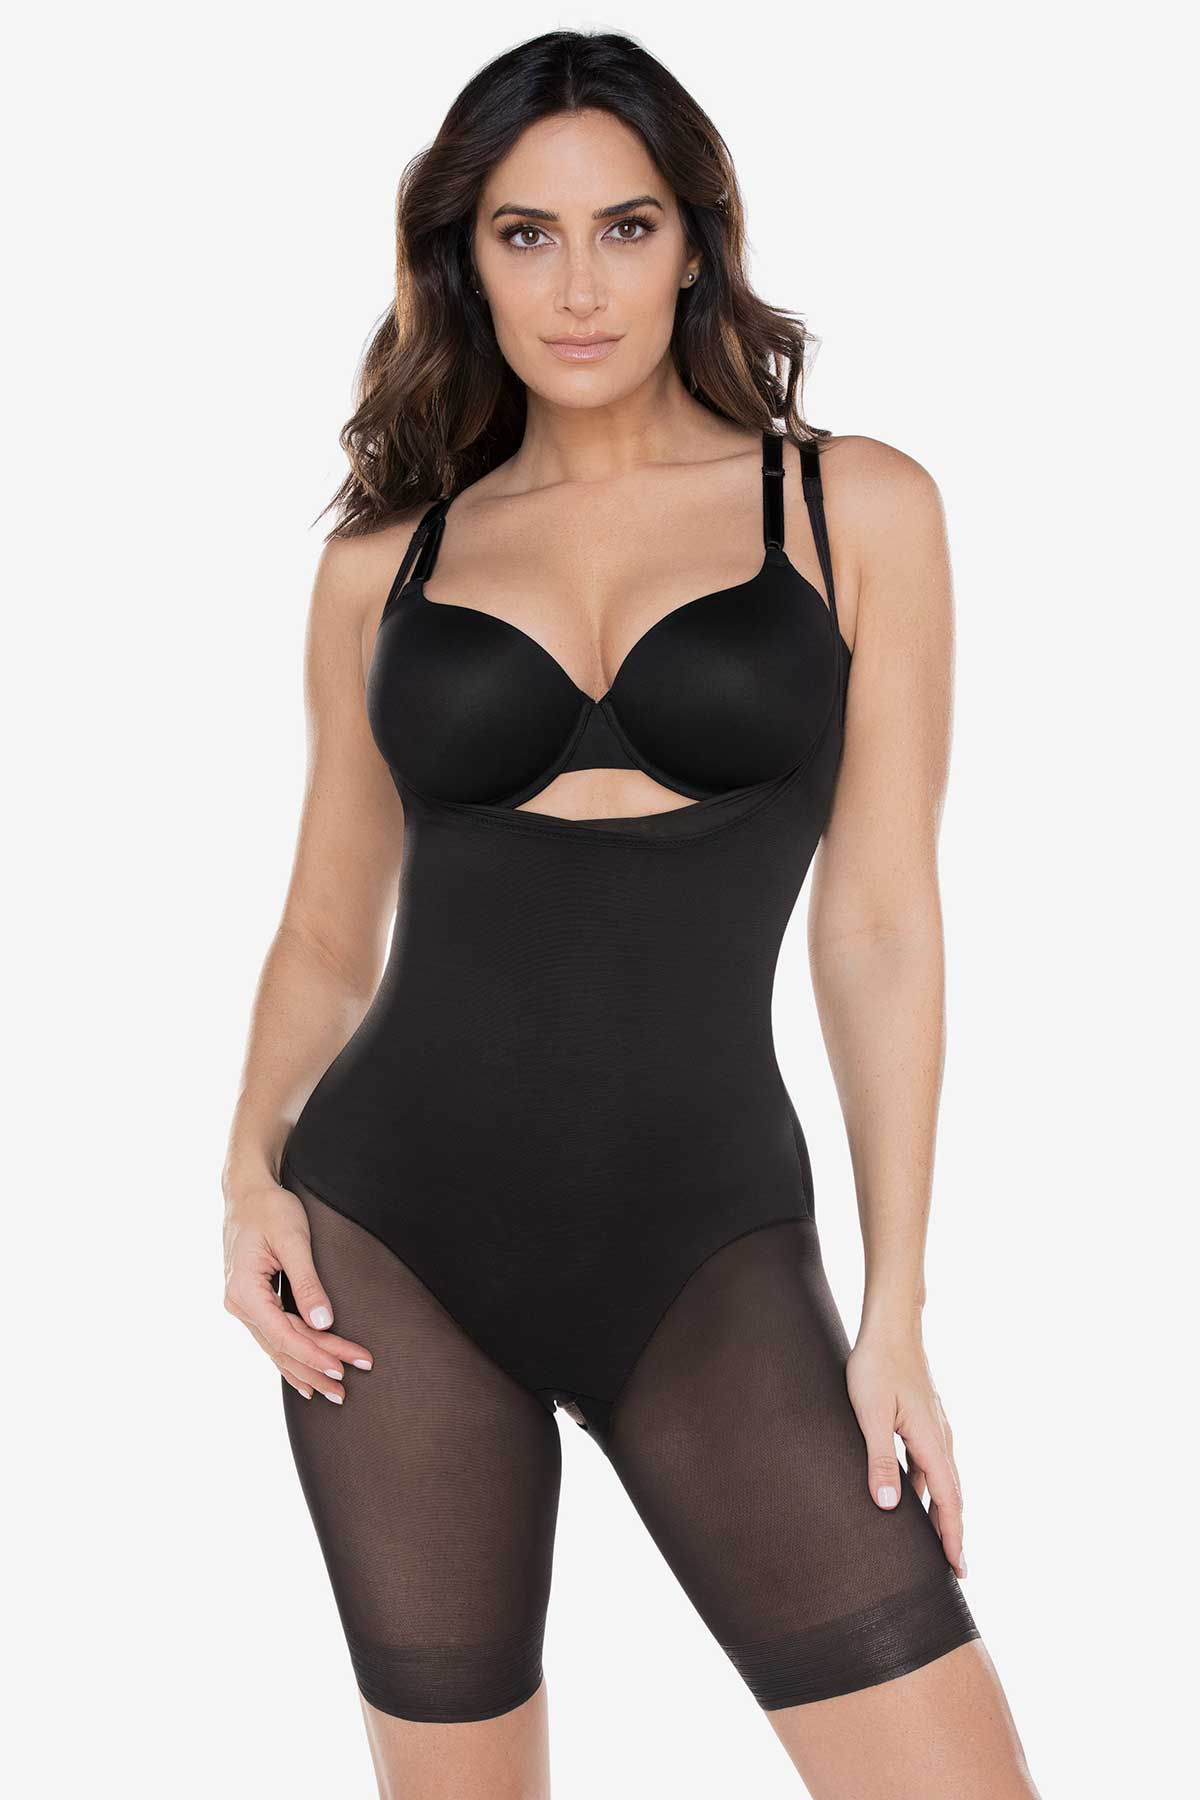 NEW M&S MAGIC WEAR FIRM ALL OVER CONTROL TO SLIM & SHAPE UNDERWIRED BODY  34B